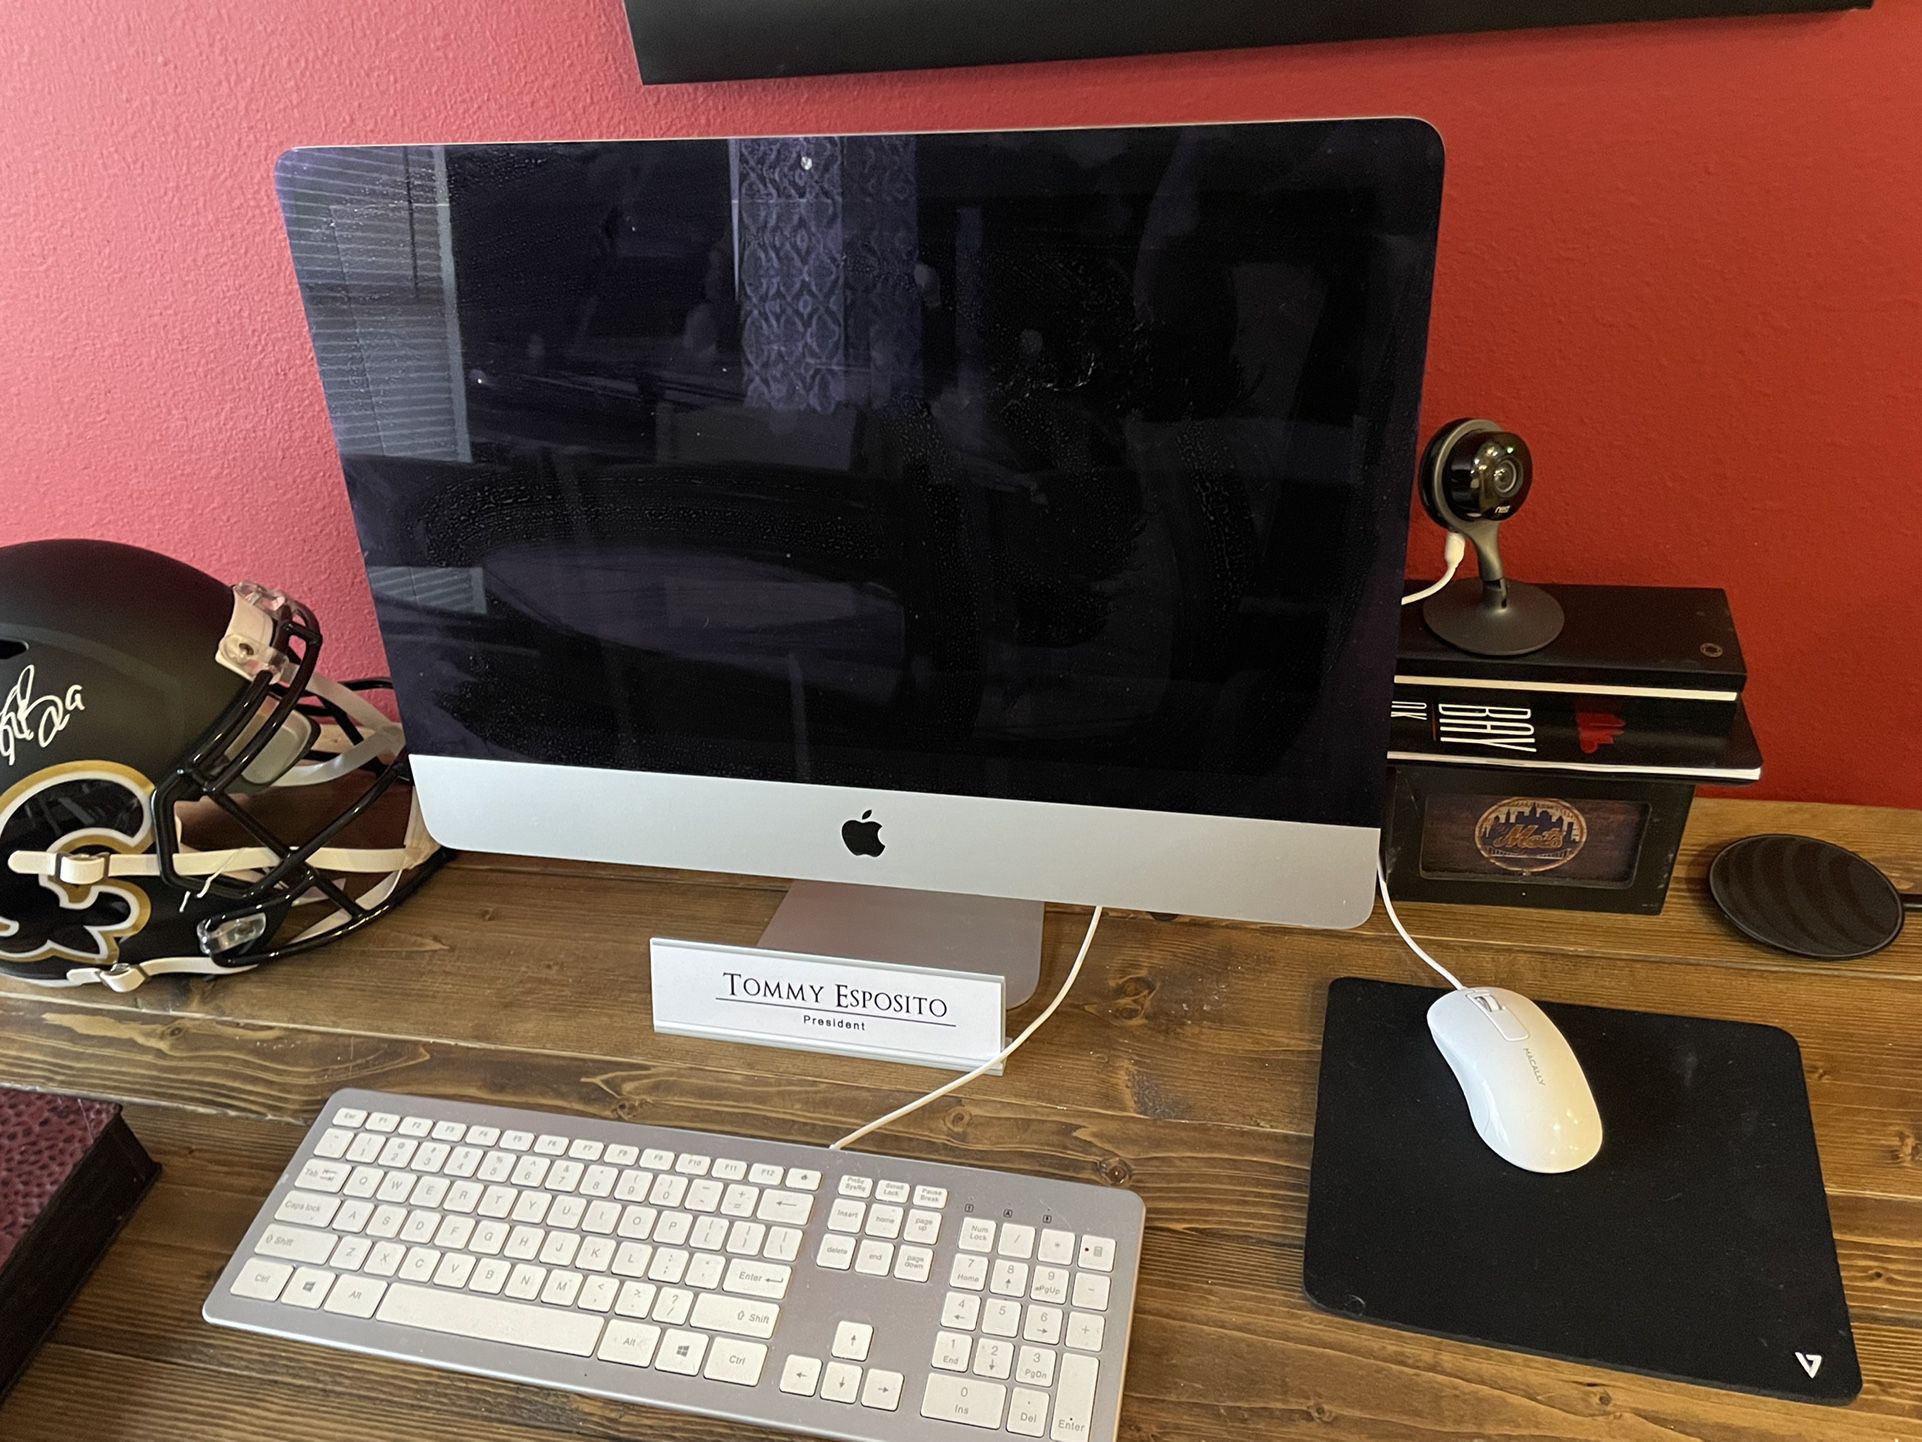 2017 iMac perfect condition comes with everything